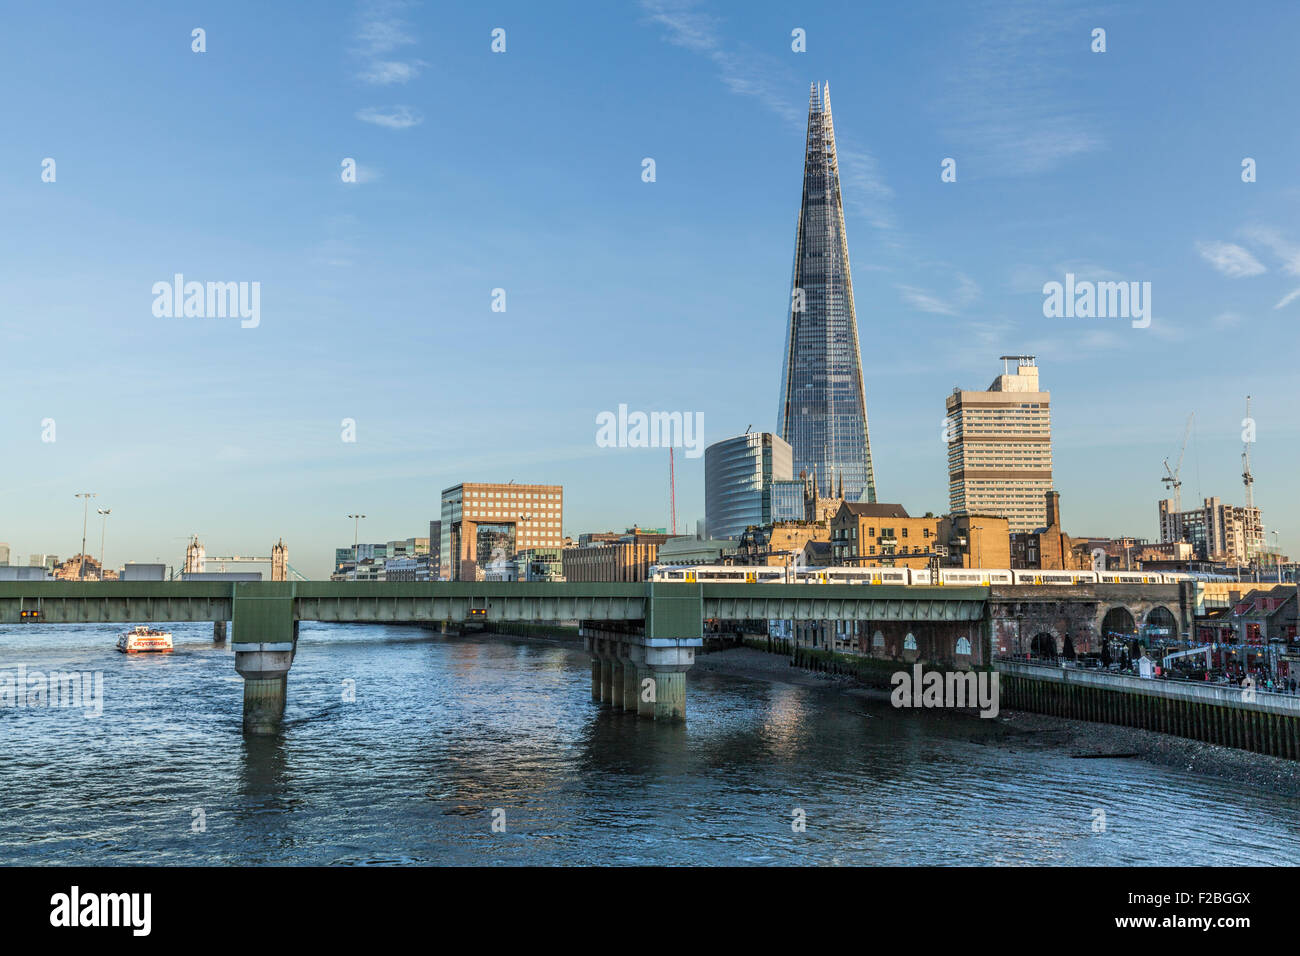 Southwark Bridge in London by the River Thames with the Shard Southwark Cathedral Guys Hospital &Tower Bridge in the background Stock Photo